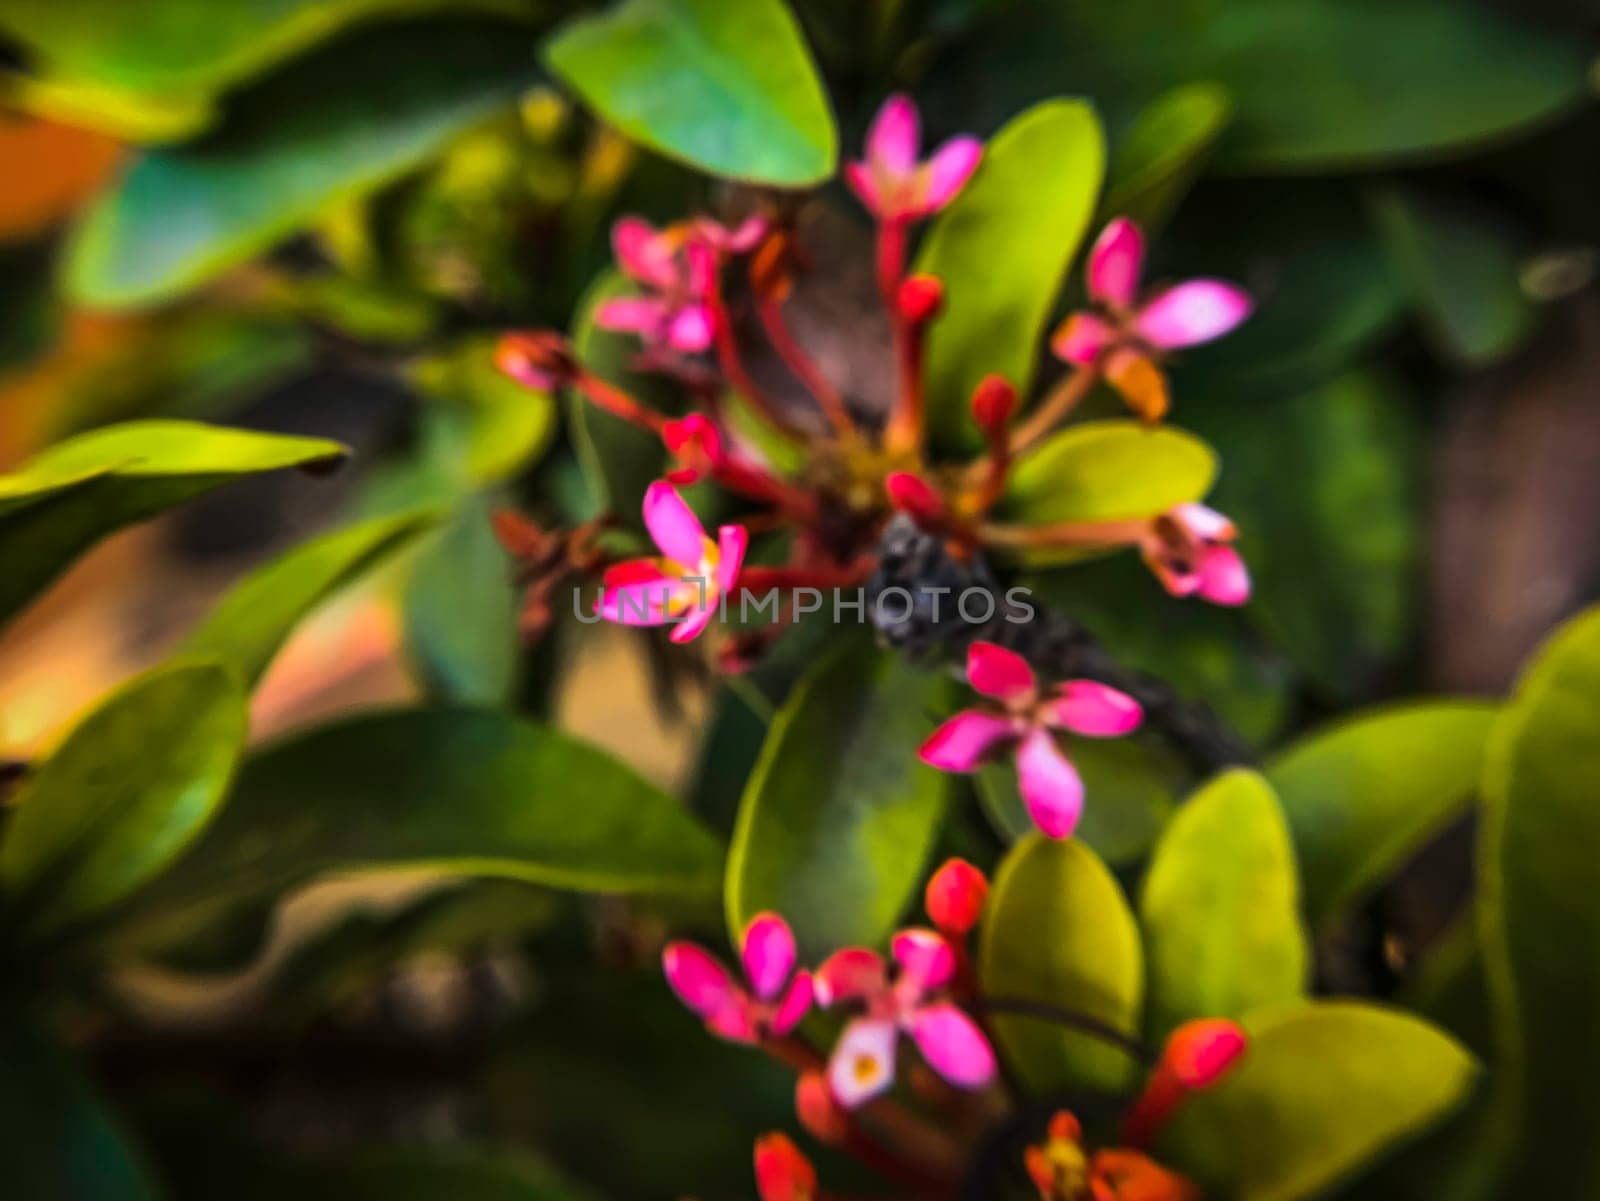 This close-up photo beautifully captures a cluster of small pink flowers, growing on a green plant with glossy leaves. The flowers, in sharp focus, stand out against a blurred background of more green foliage. The image, with its shallow depth of field, perfectly portrays the delicate beauty of nature. High-quality photo